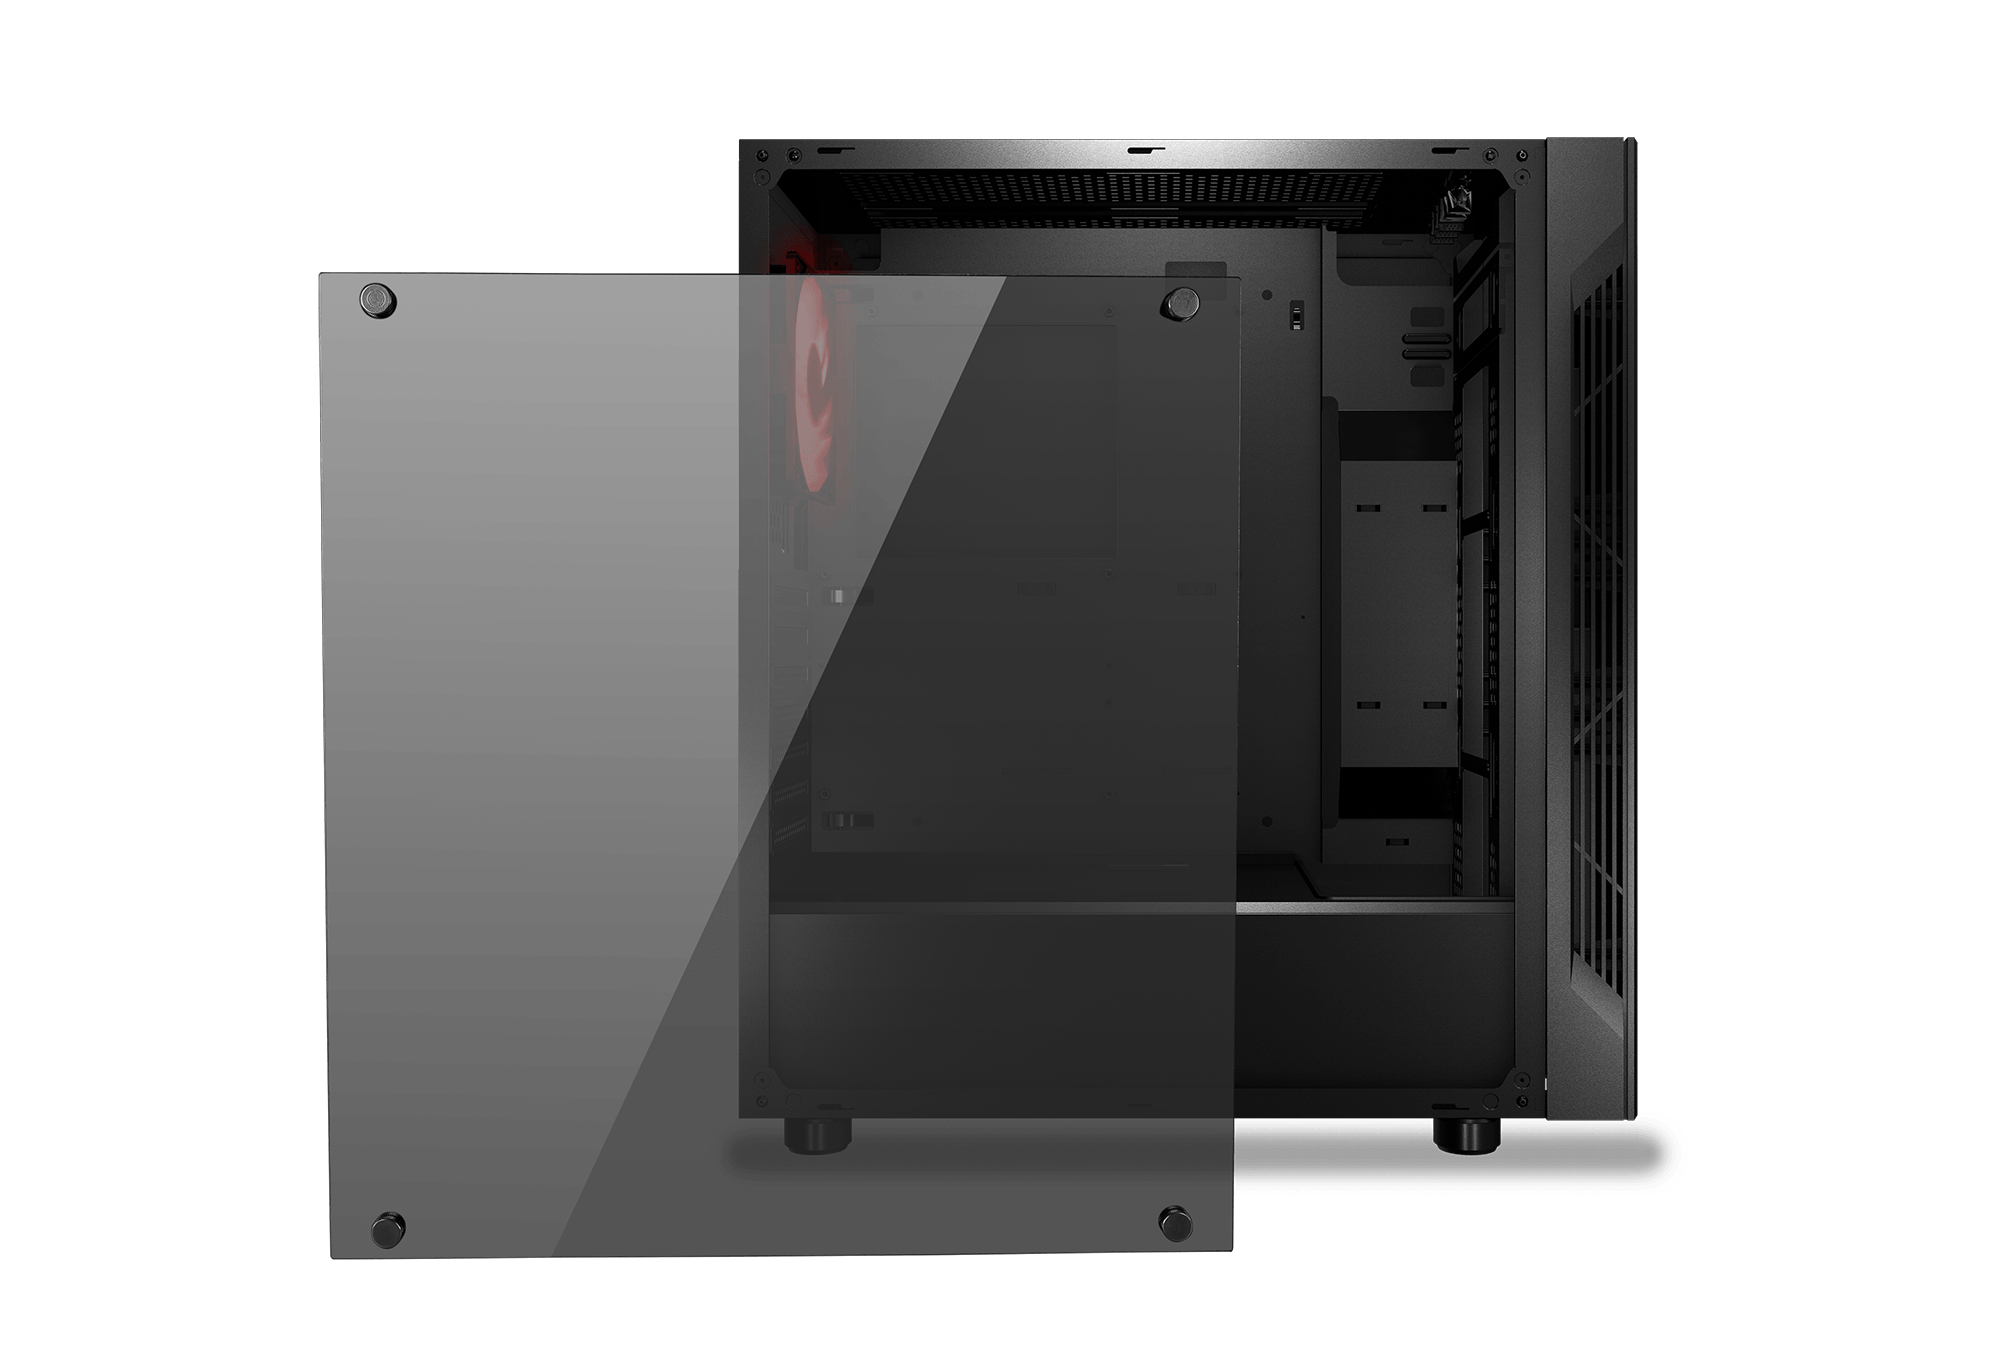 MSI Tempered Glass